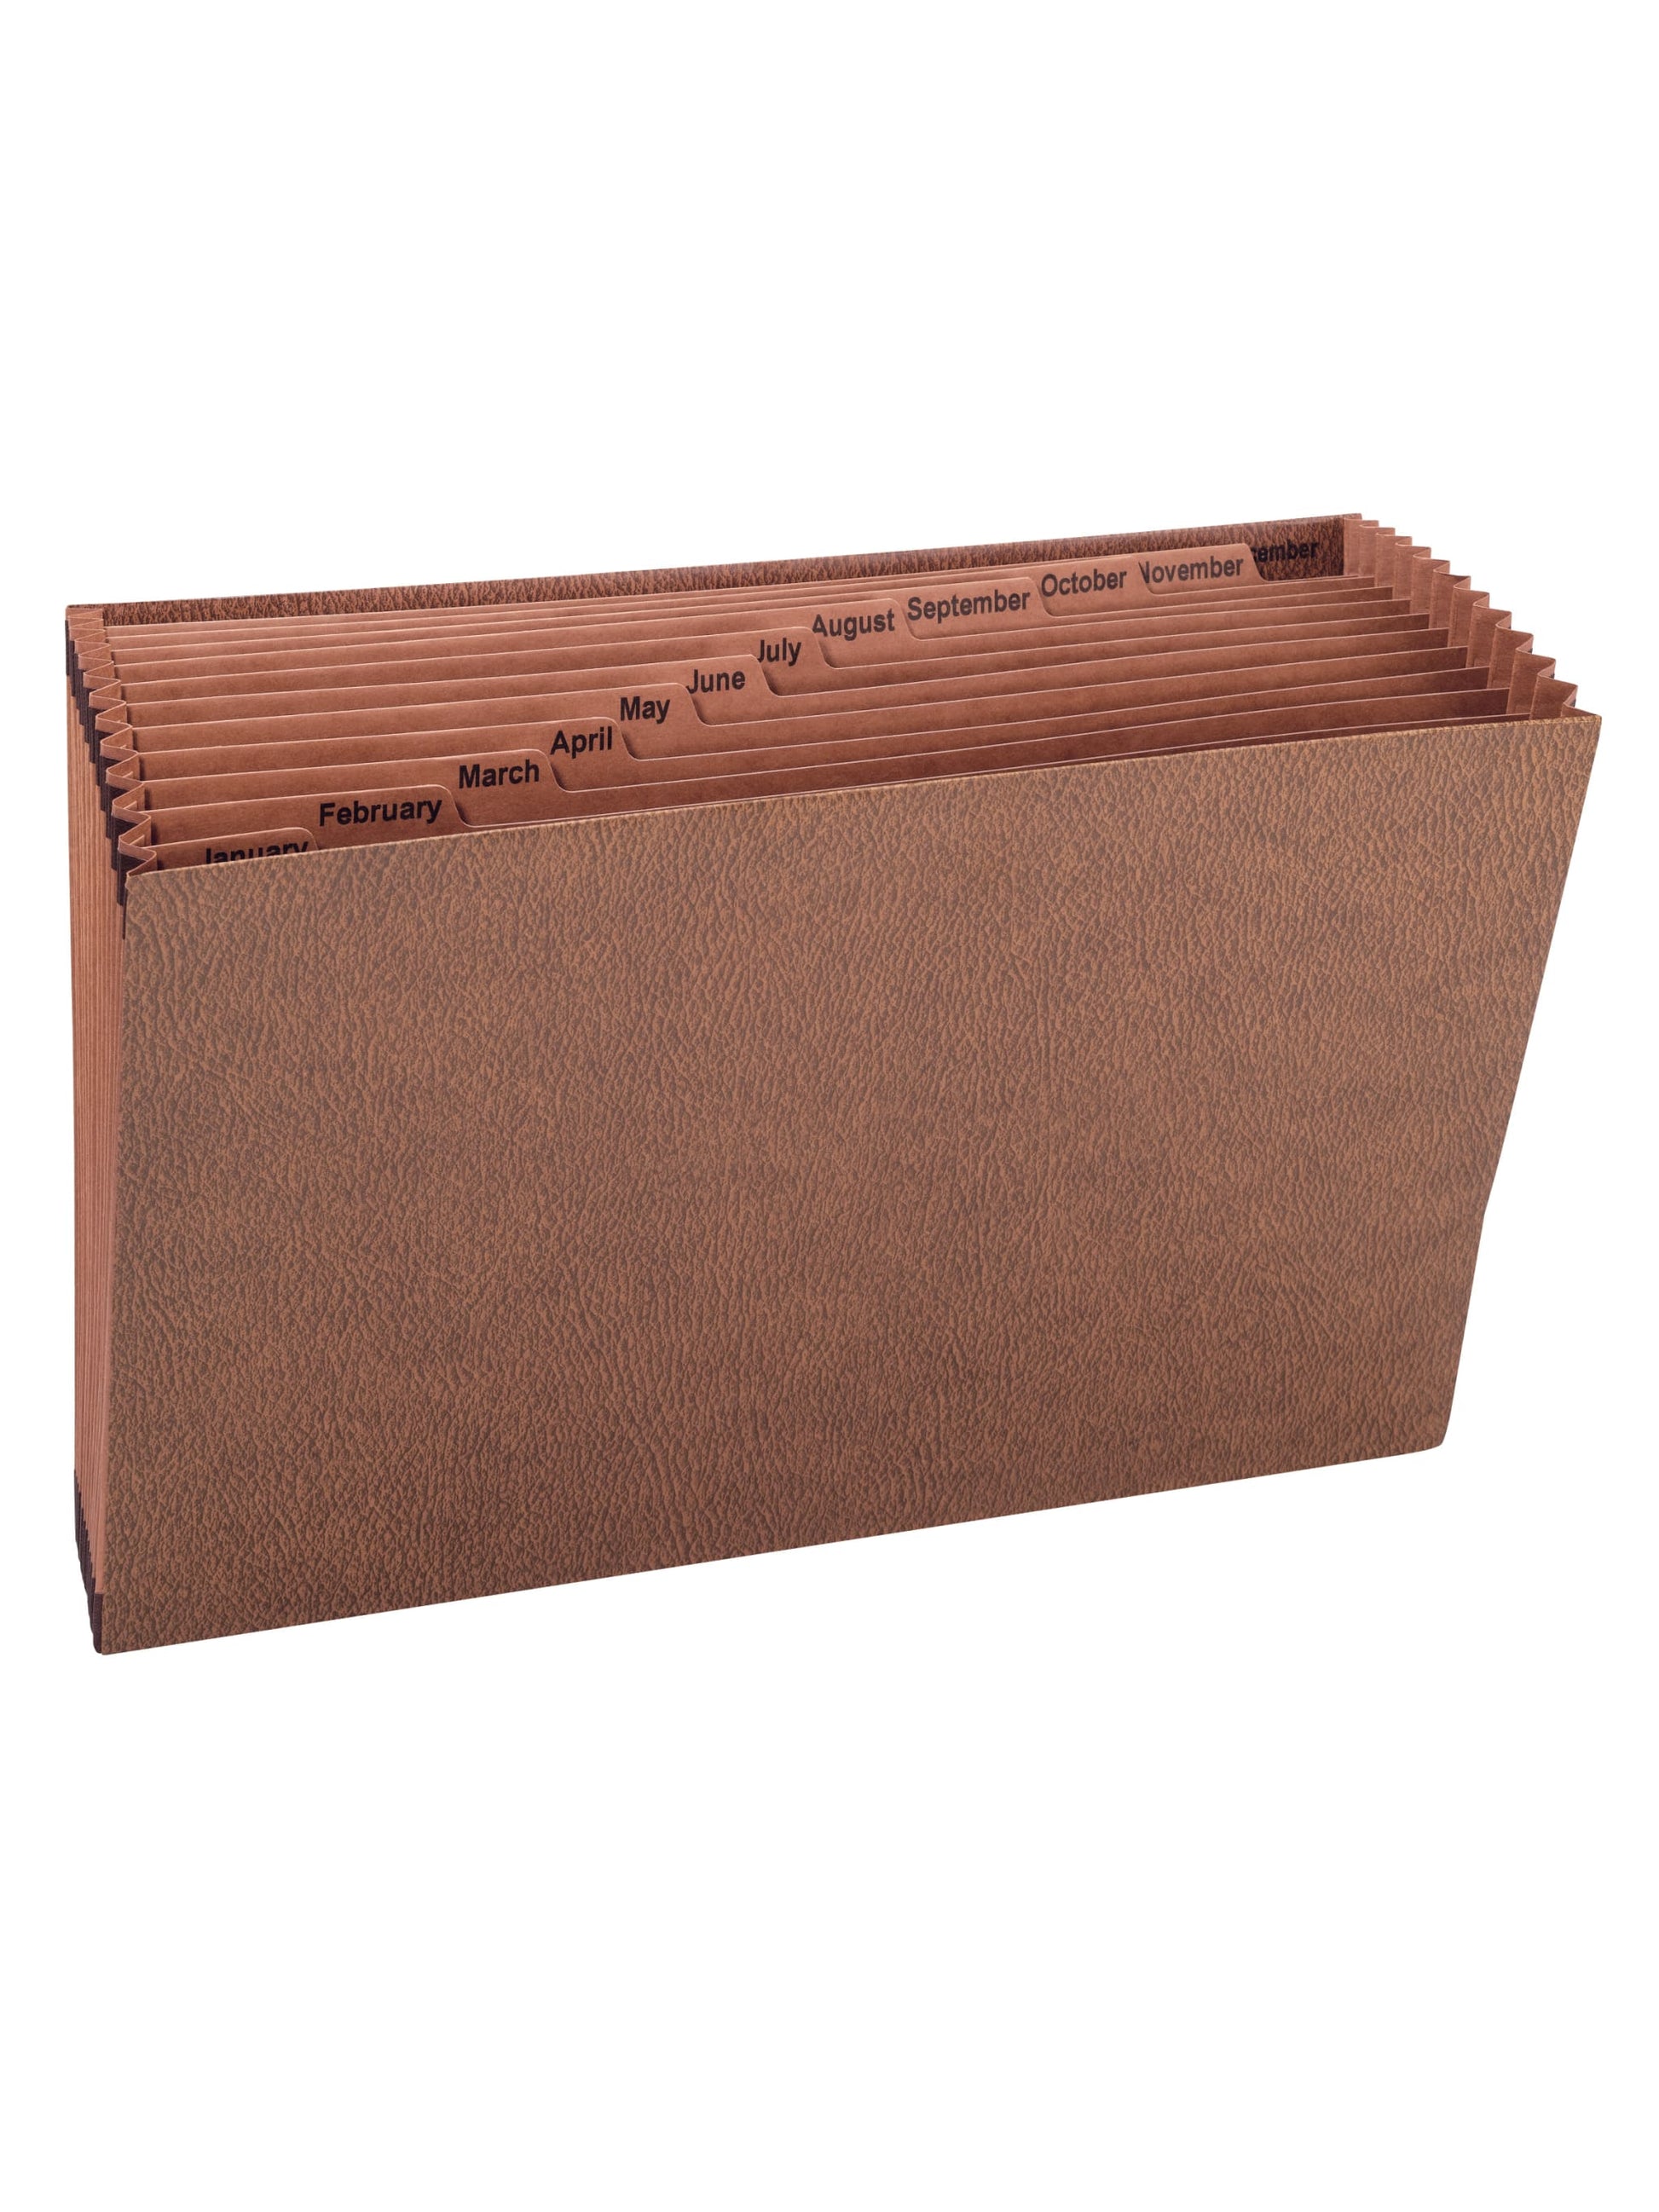 TUFF® Expanding Files, 12 Pockets, Monthly Jan-Dec, Brown Color, Legal Size, Set of 1, 086486704908